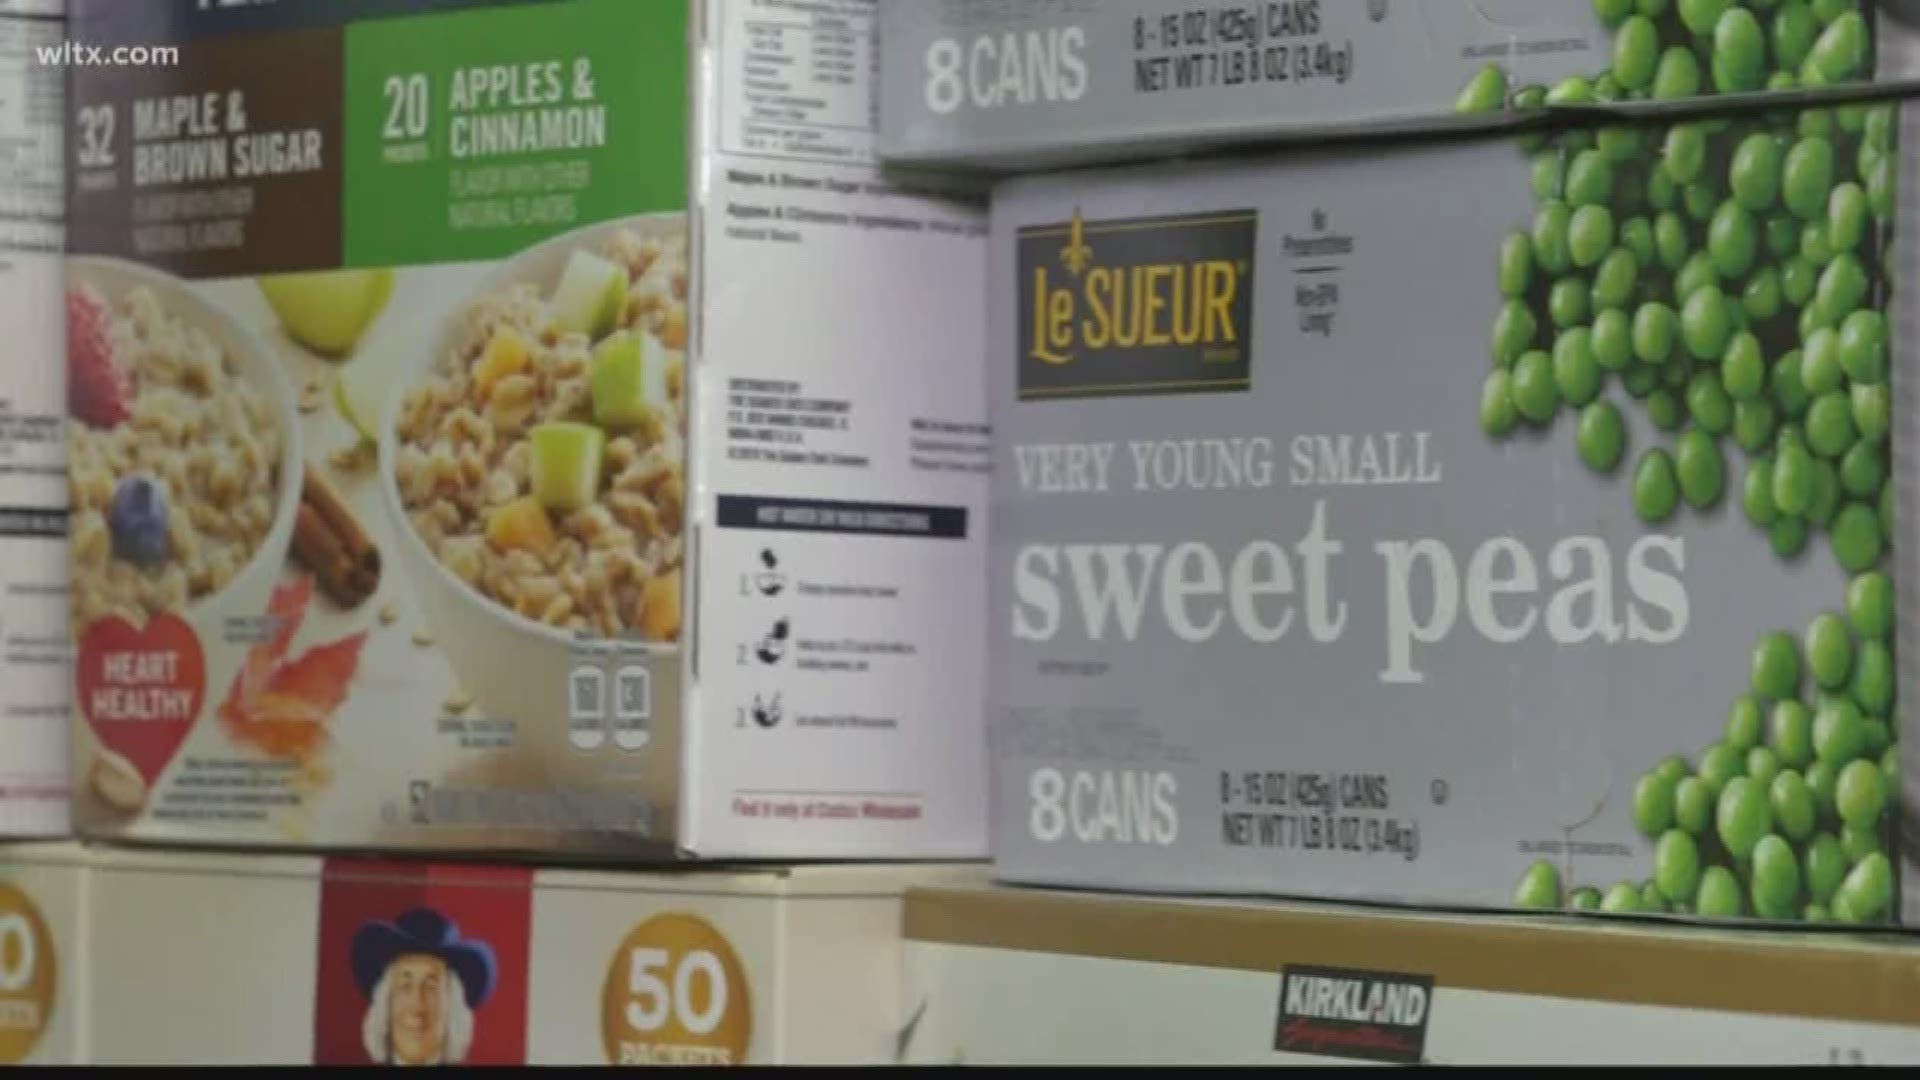 The Springdale community has been collecting food to feed senior citizens in need in Lexington County.